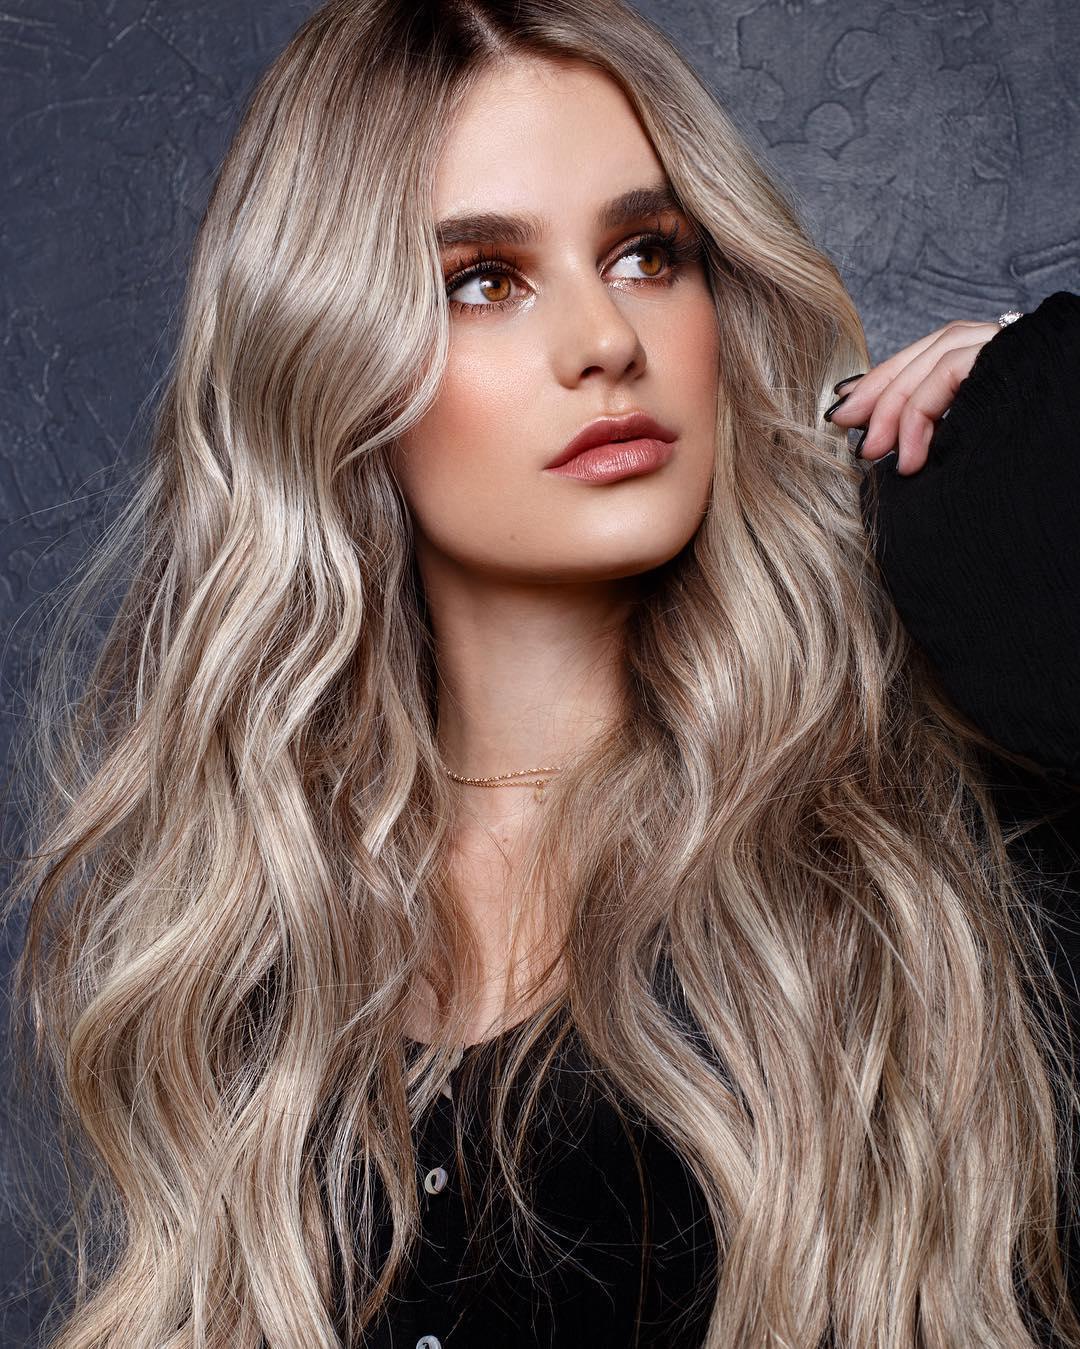 Dark Blonde Hair Color The Perfect Stylish Look That Makes